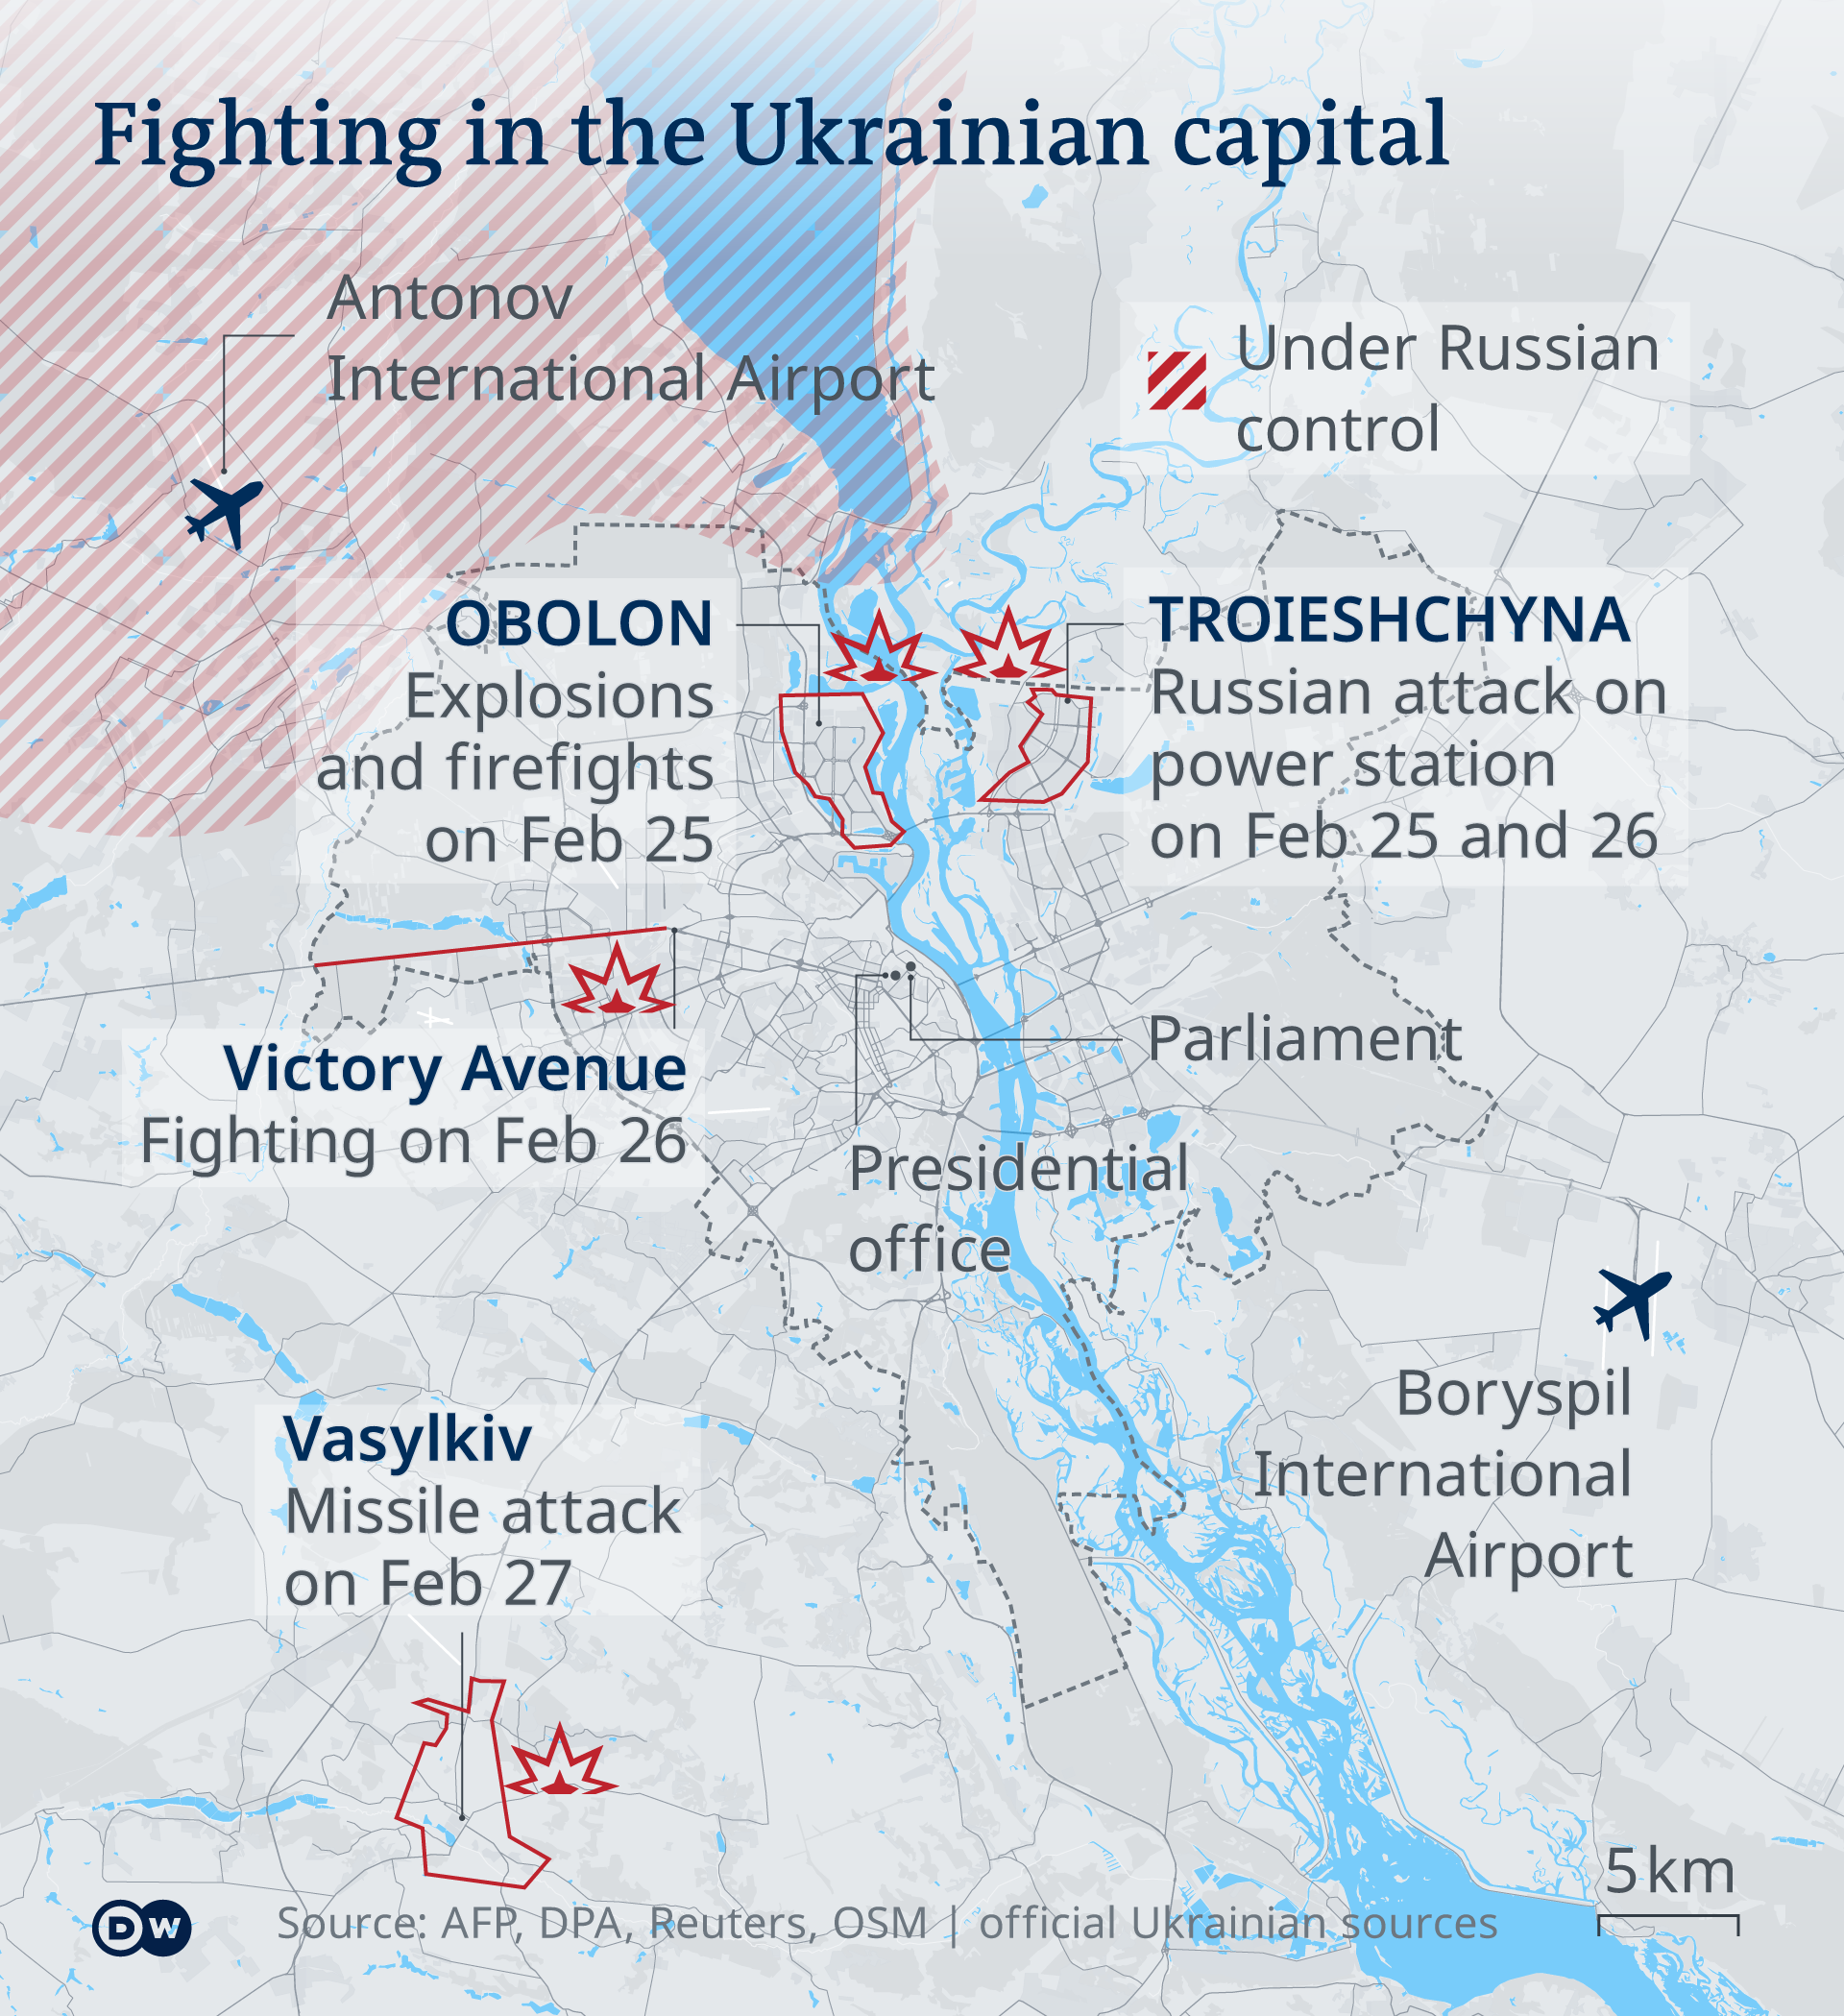 A map showing locations of clashes in and around Kyiv